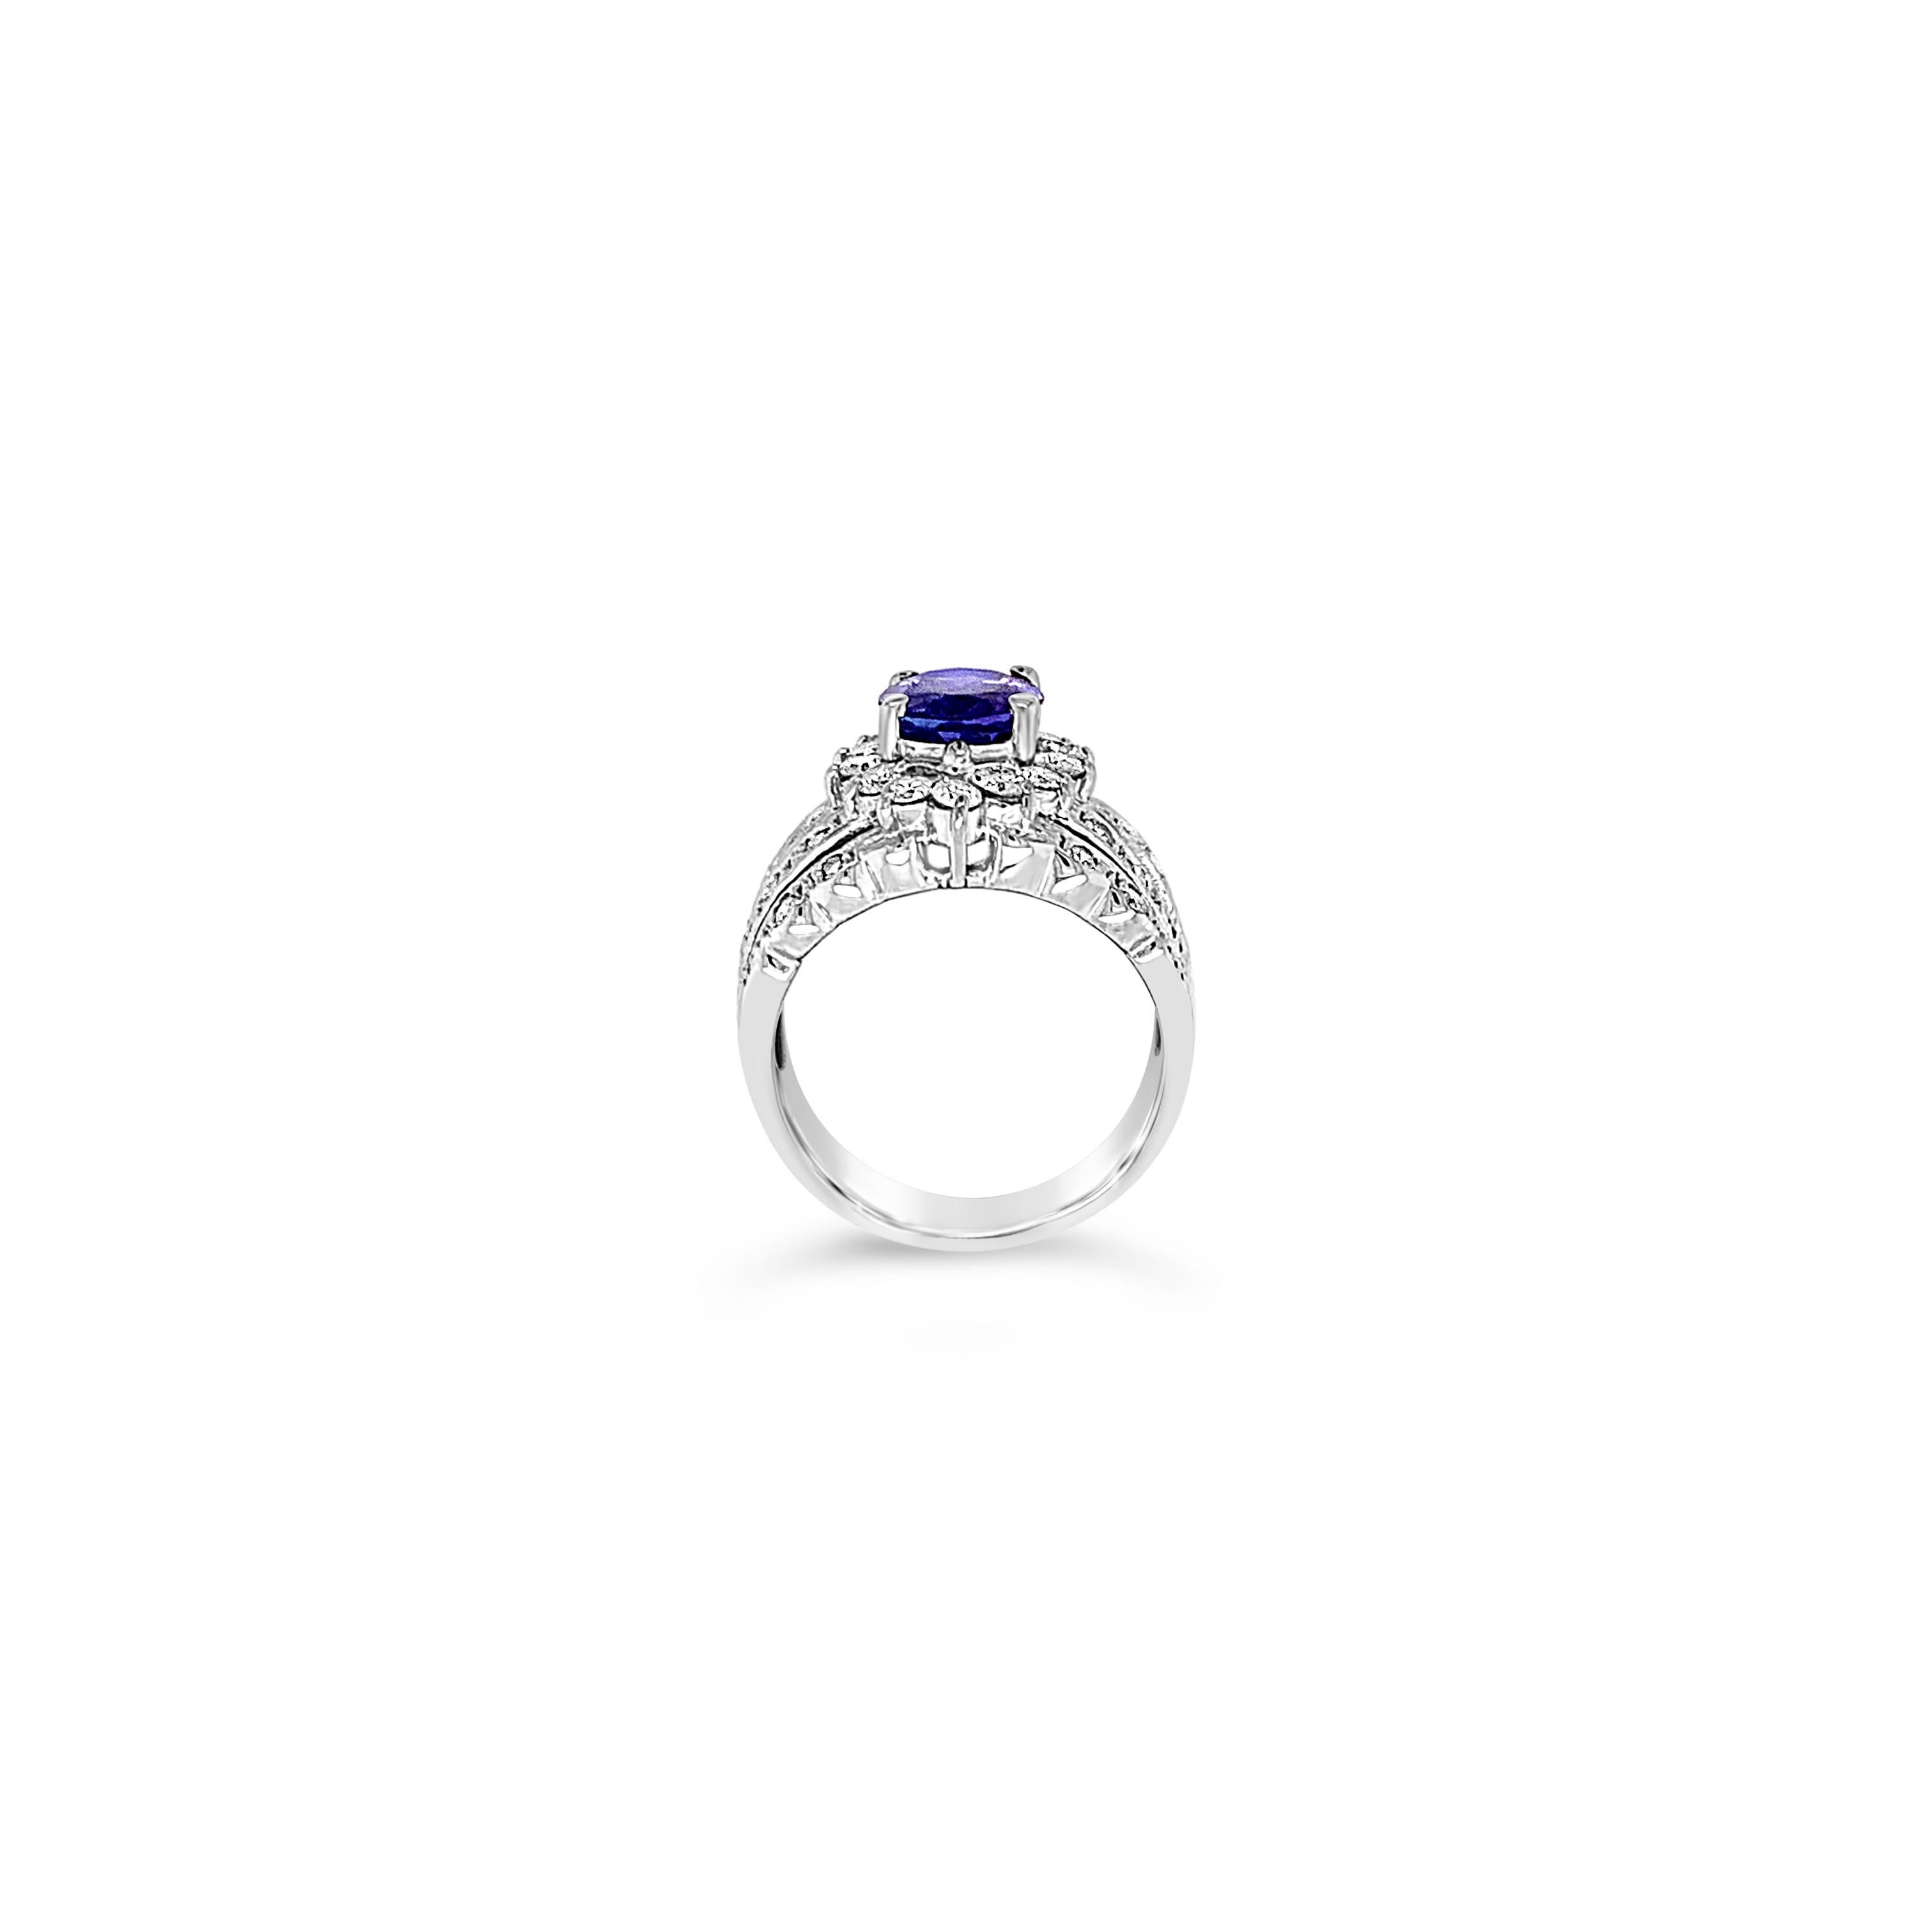 Totaling almost 3 Carats of Tanzanite and White Diamonds, this Grand Sample Sale ring is a keeper! Set in 18K White Gold and in great condition. LeVian Grand Sample Sale Item! Ring may or may not be sizable! Comes with Authentic LeVian GSS Box!